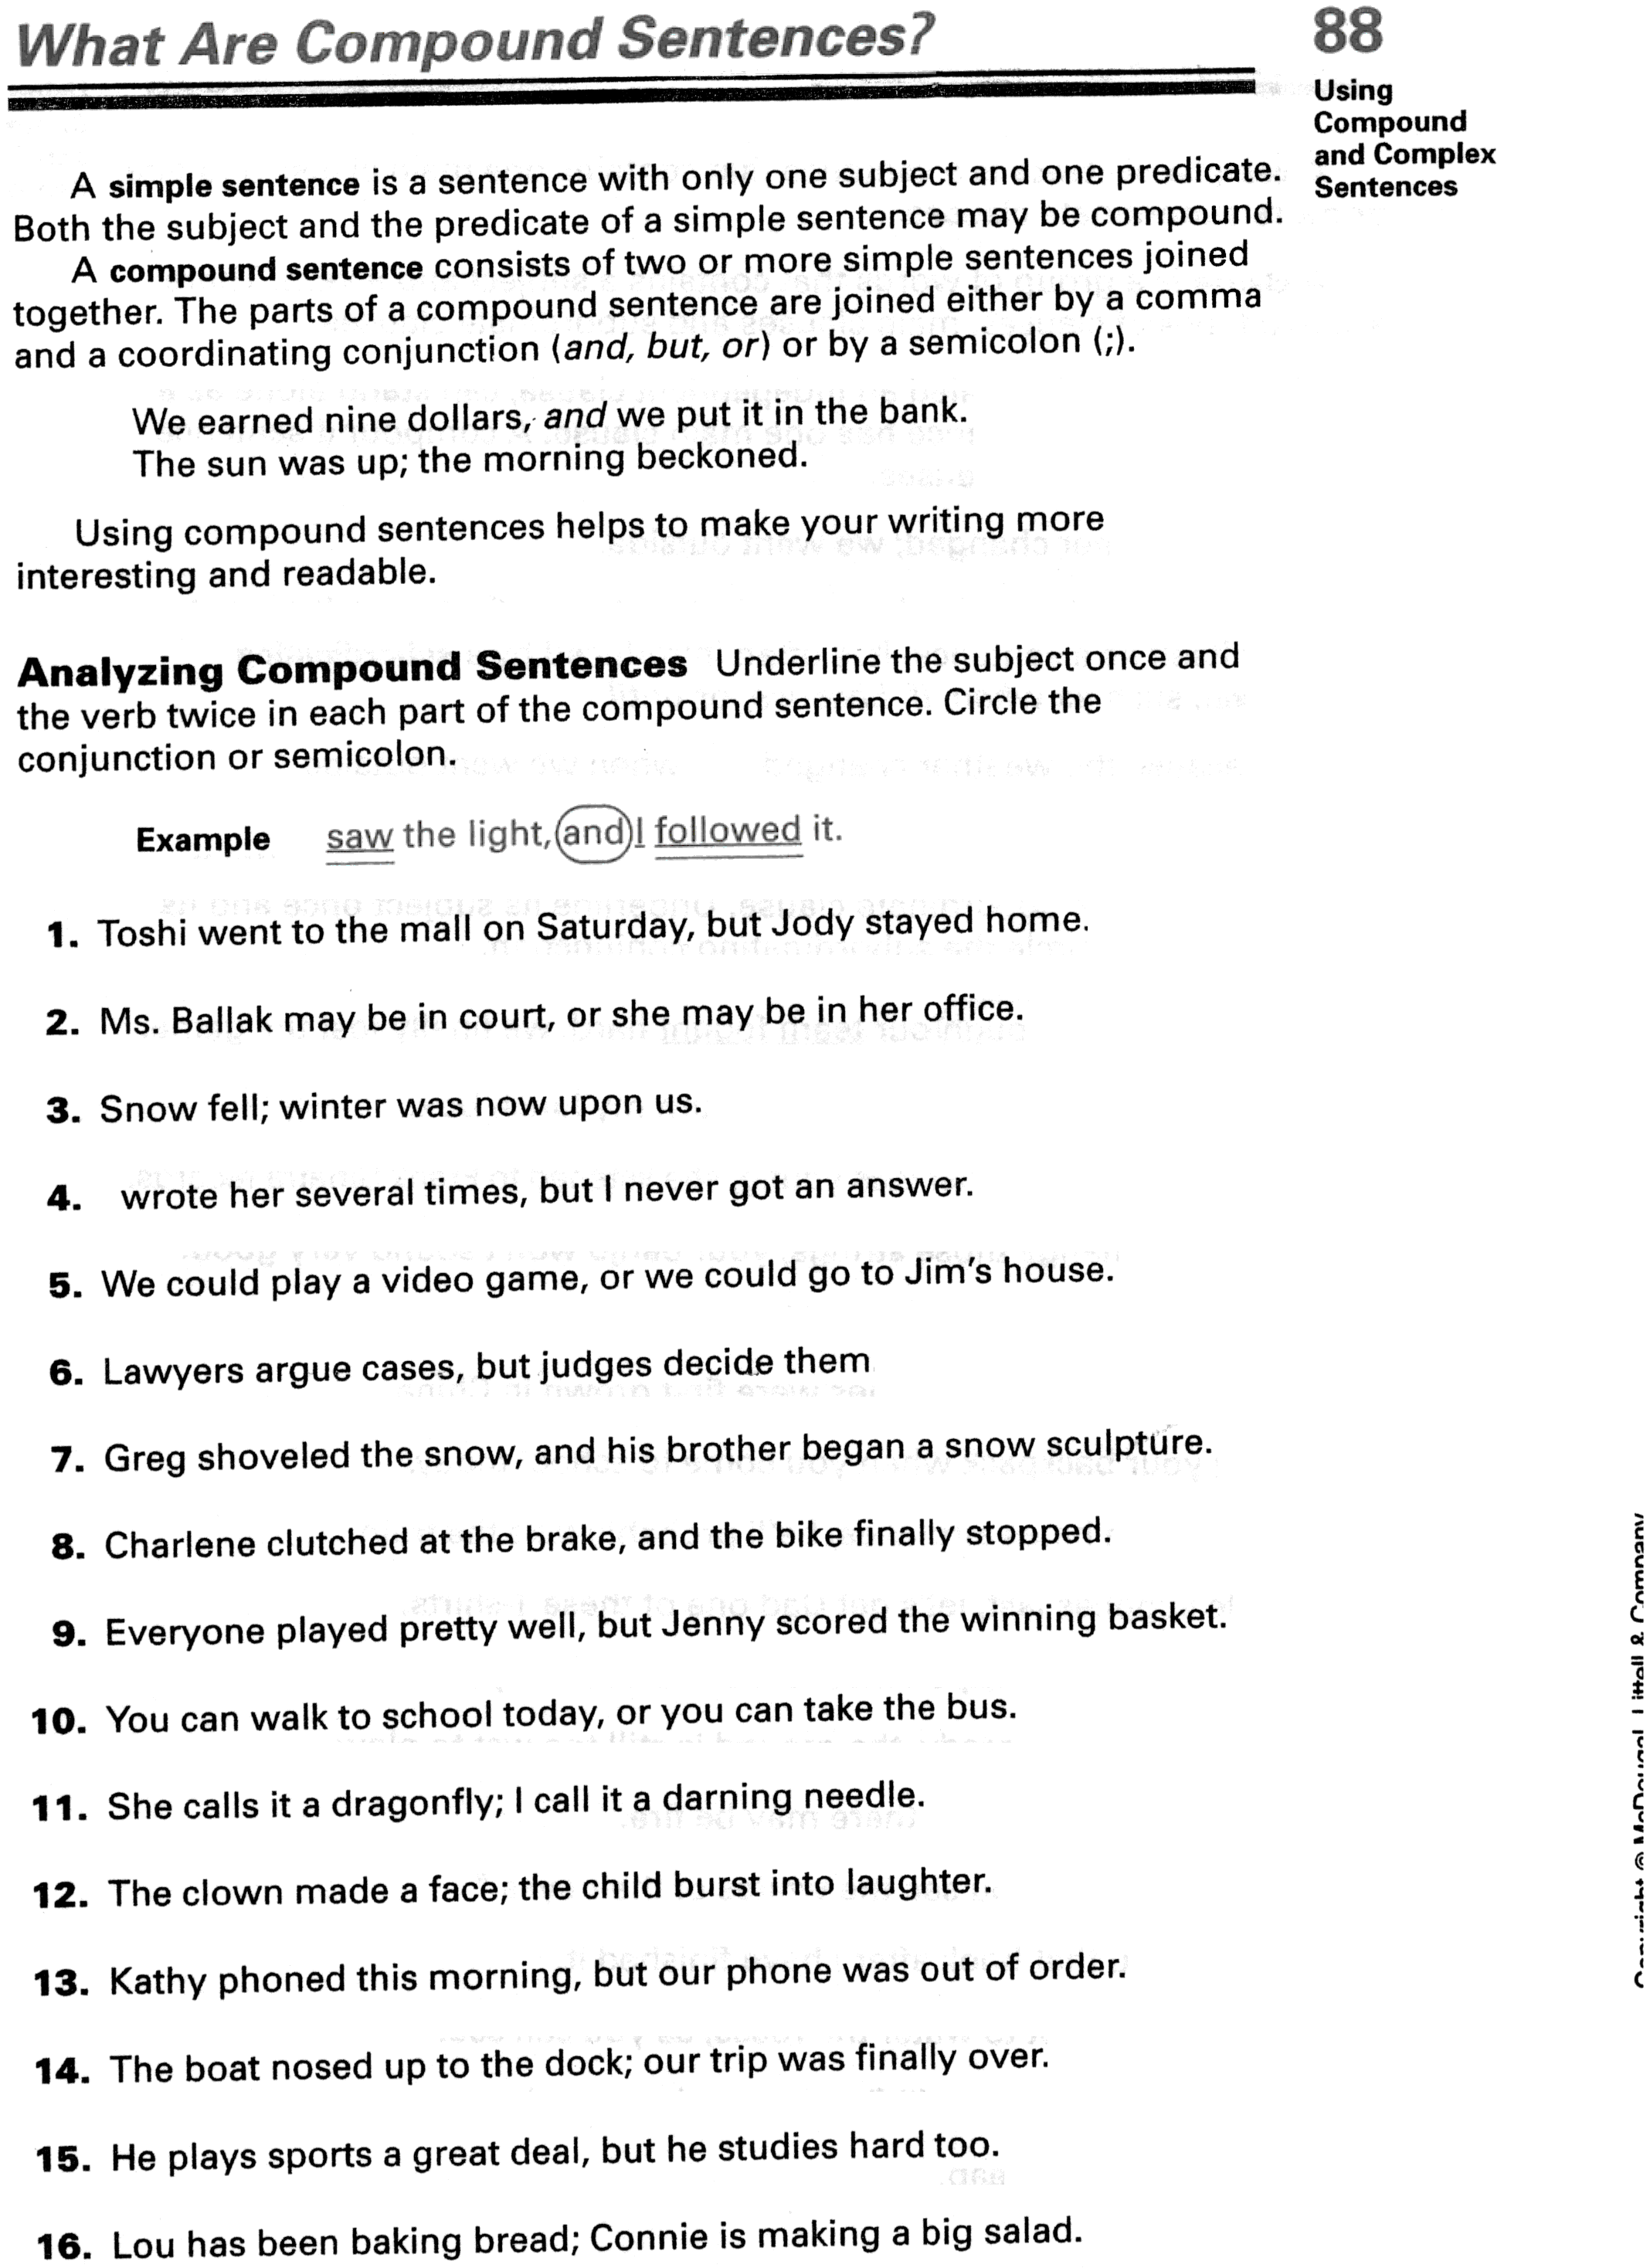 Compound Subject And Compound Predicate Worksheet